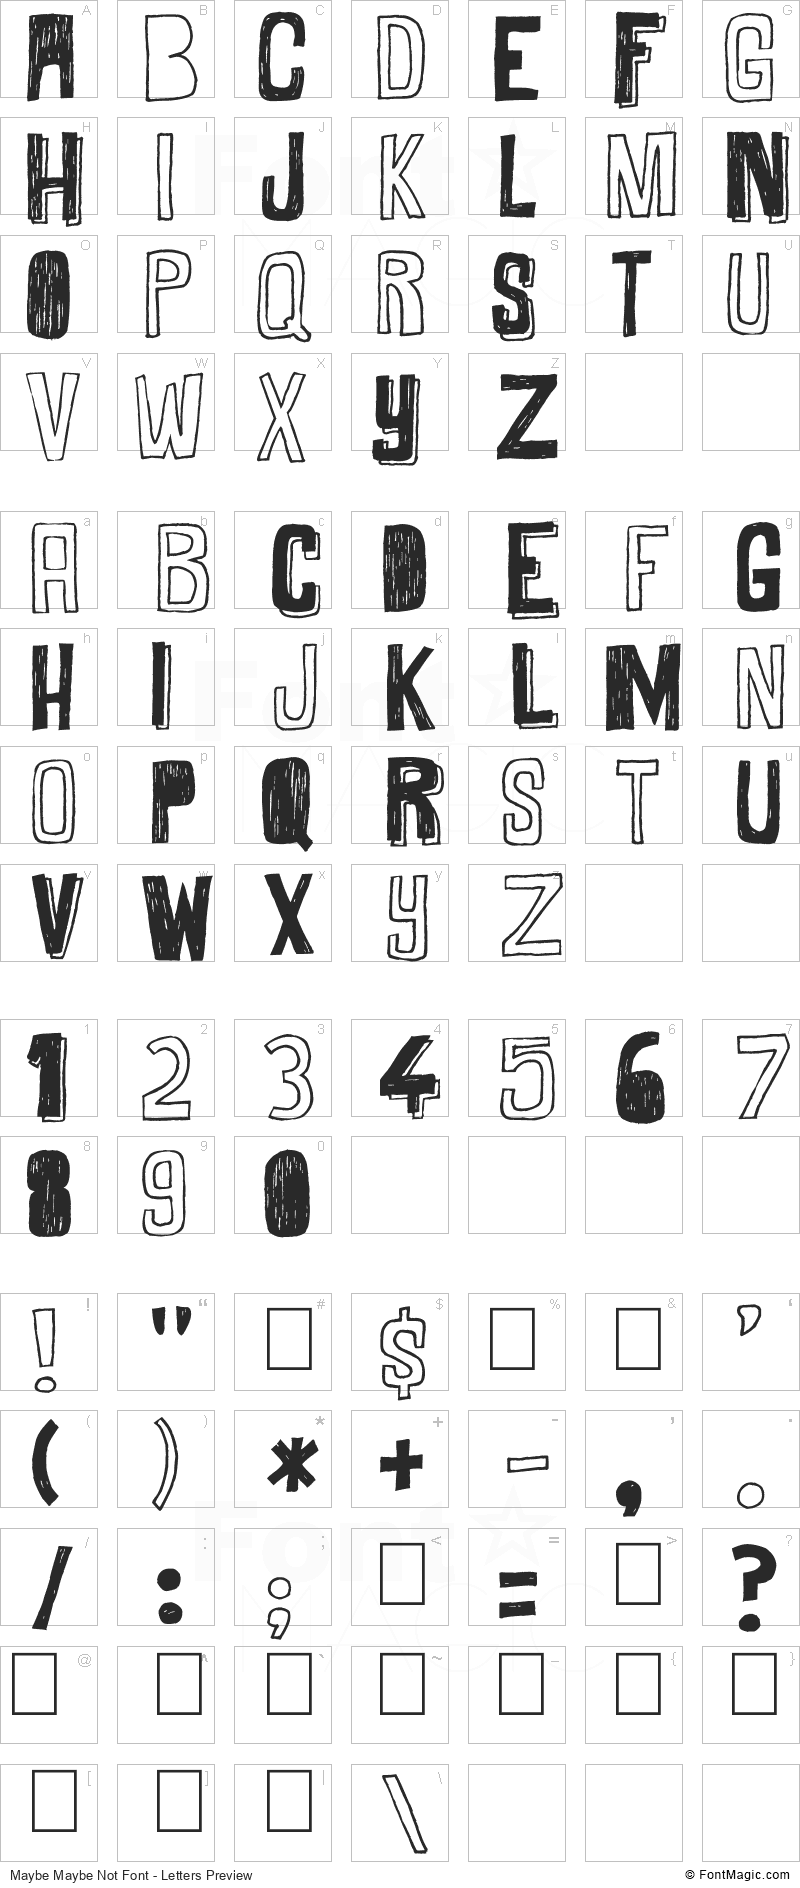 Maybe Maybe Not Font - All Latters Preview Chart